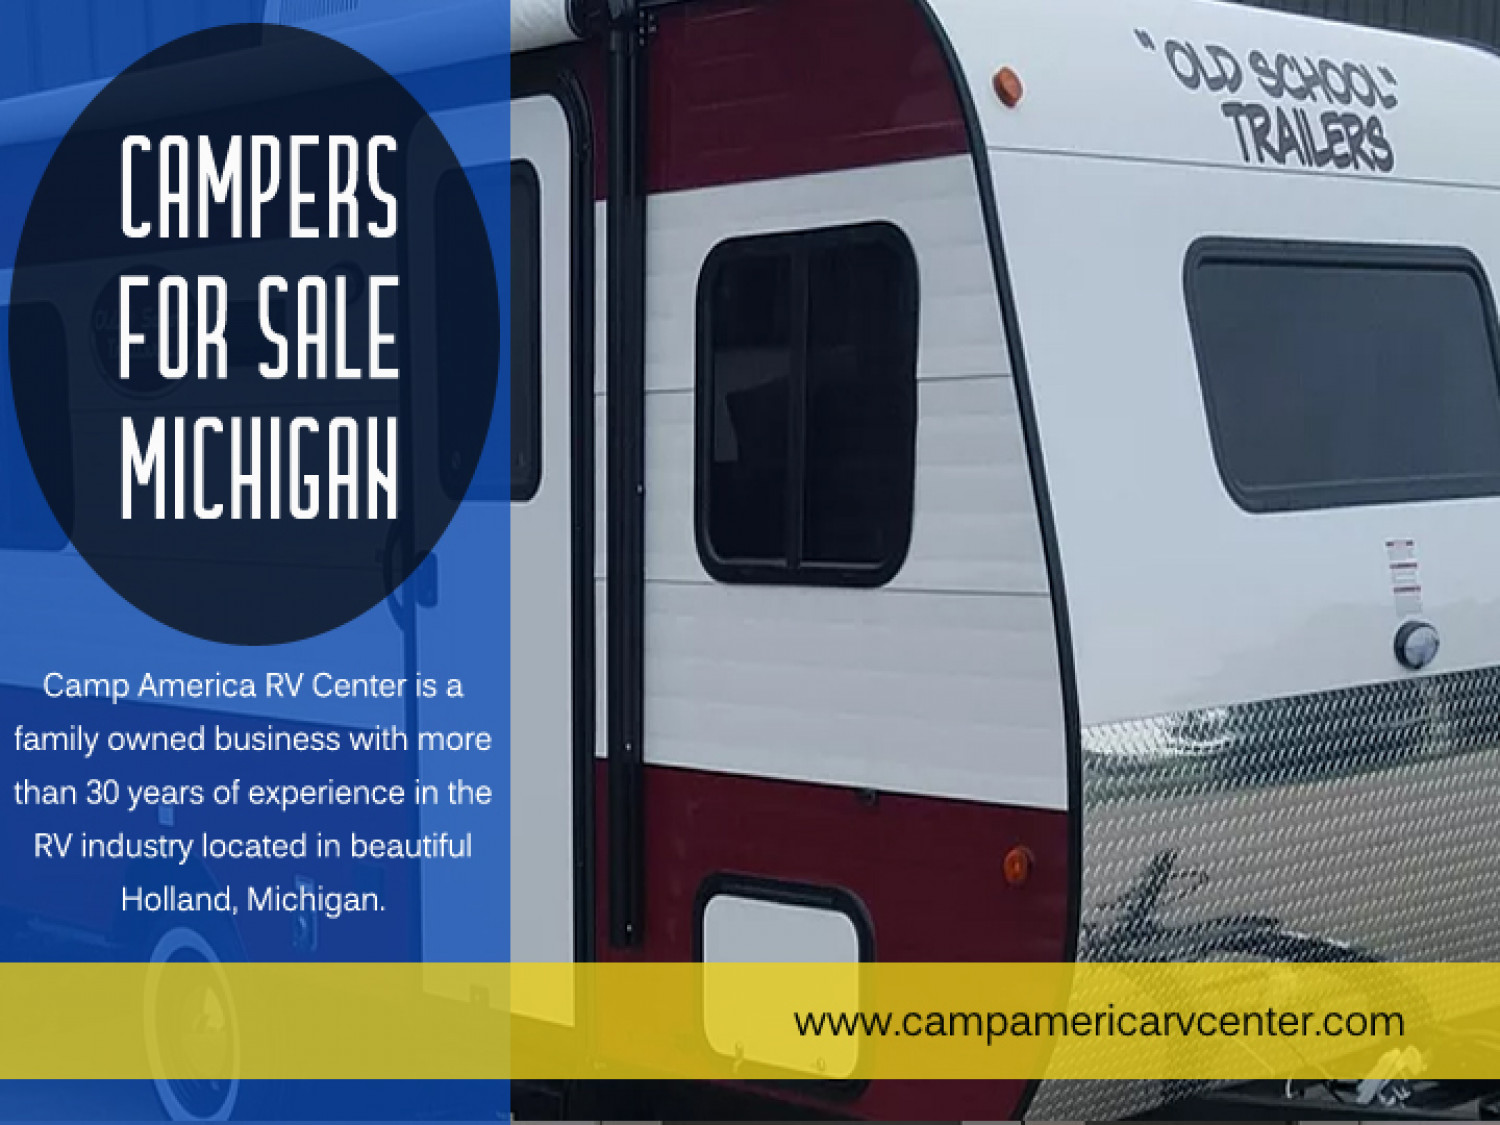 Campers for Sale Michigan Infographic